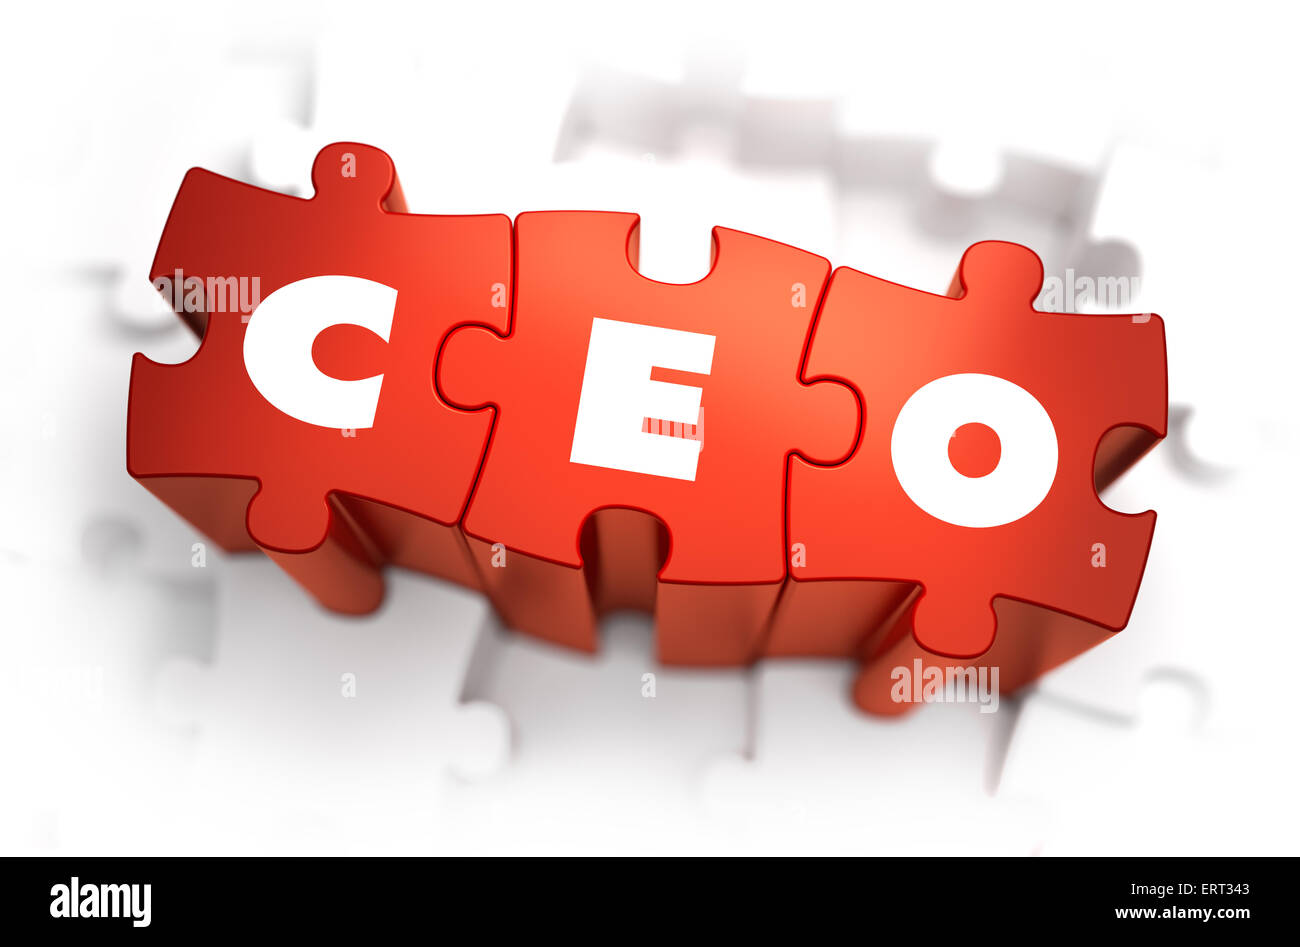 CEO - White Word on Red Puzzles. Stock Photo